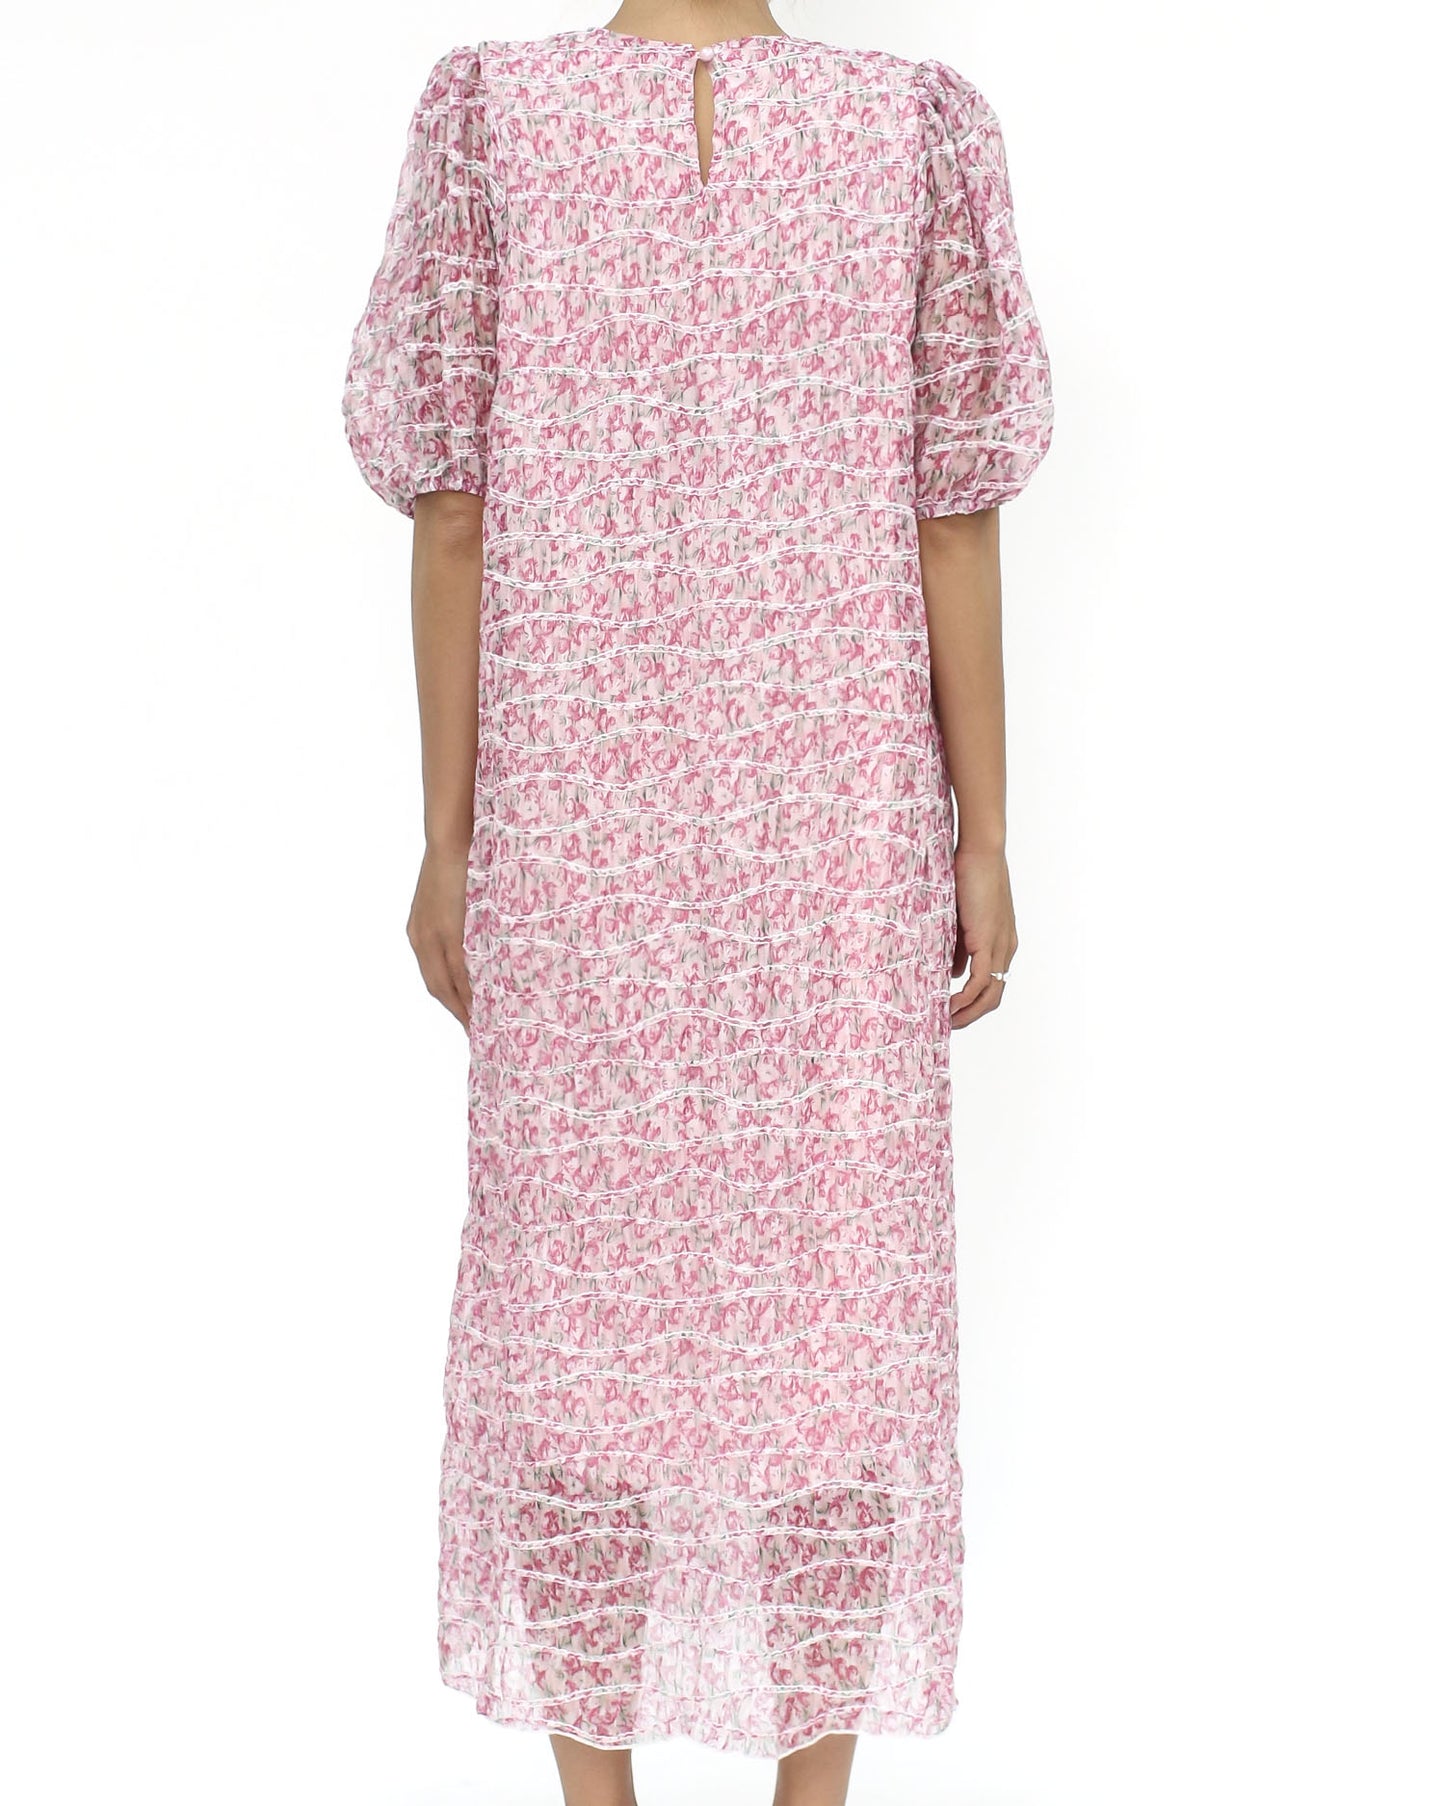 pink floral chiffon ruched dress *pre-order*